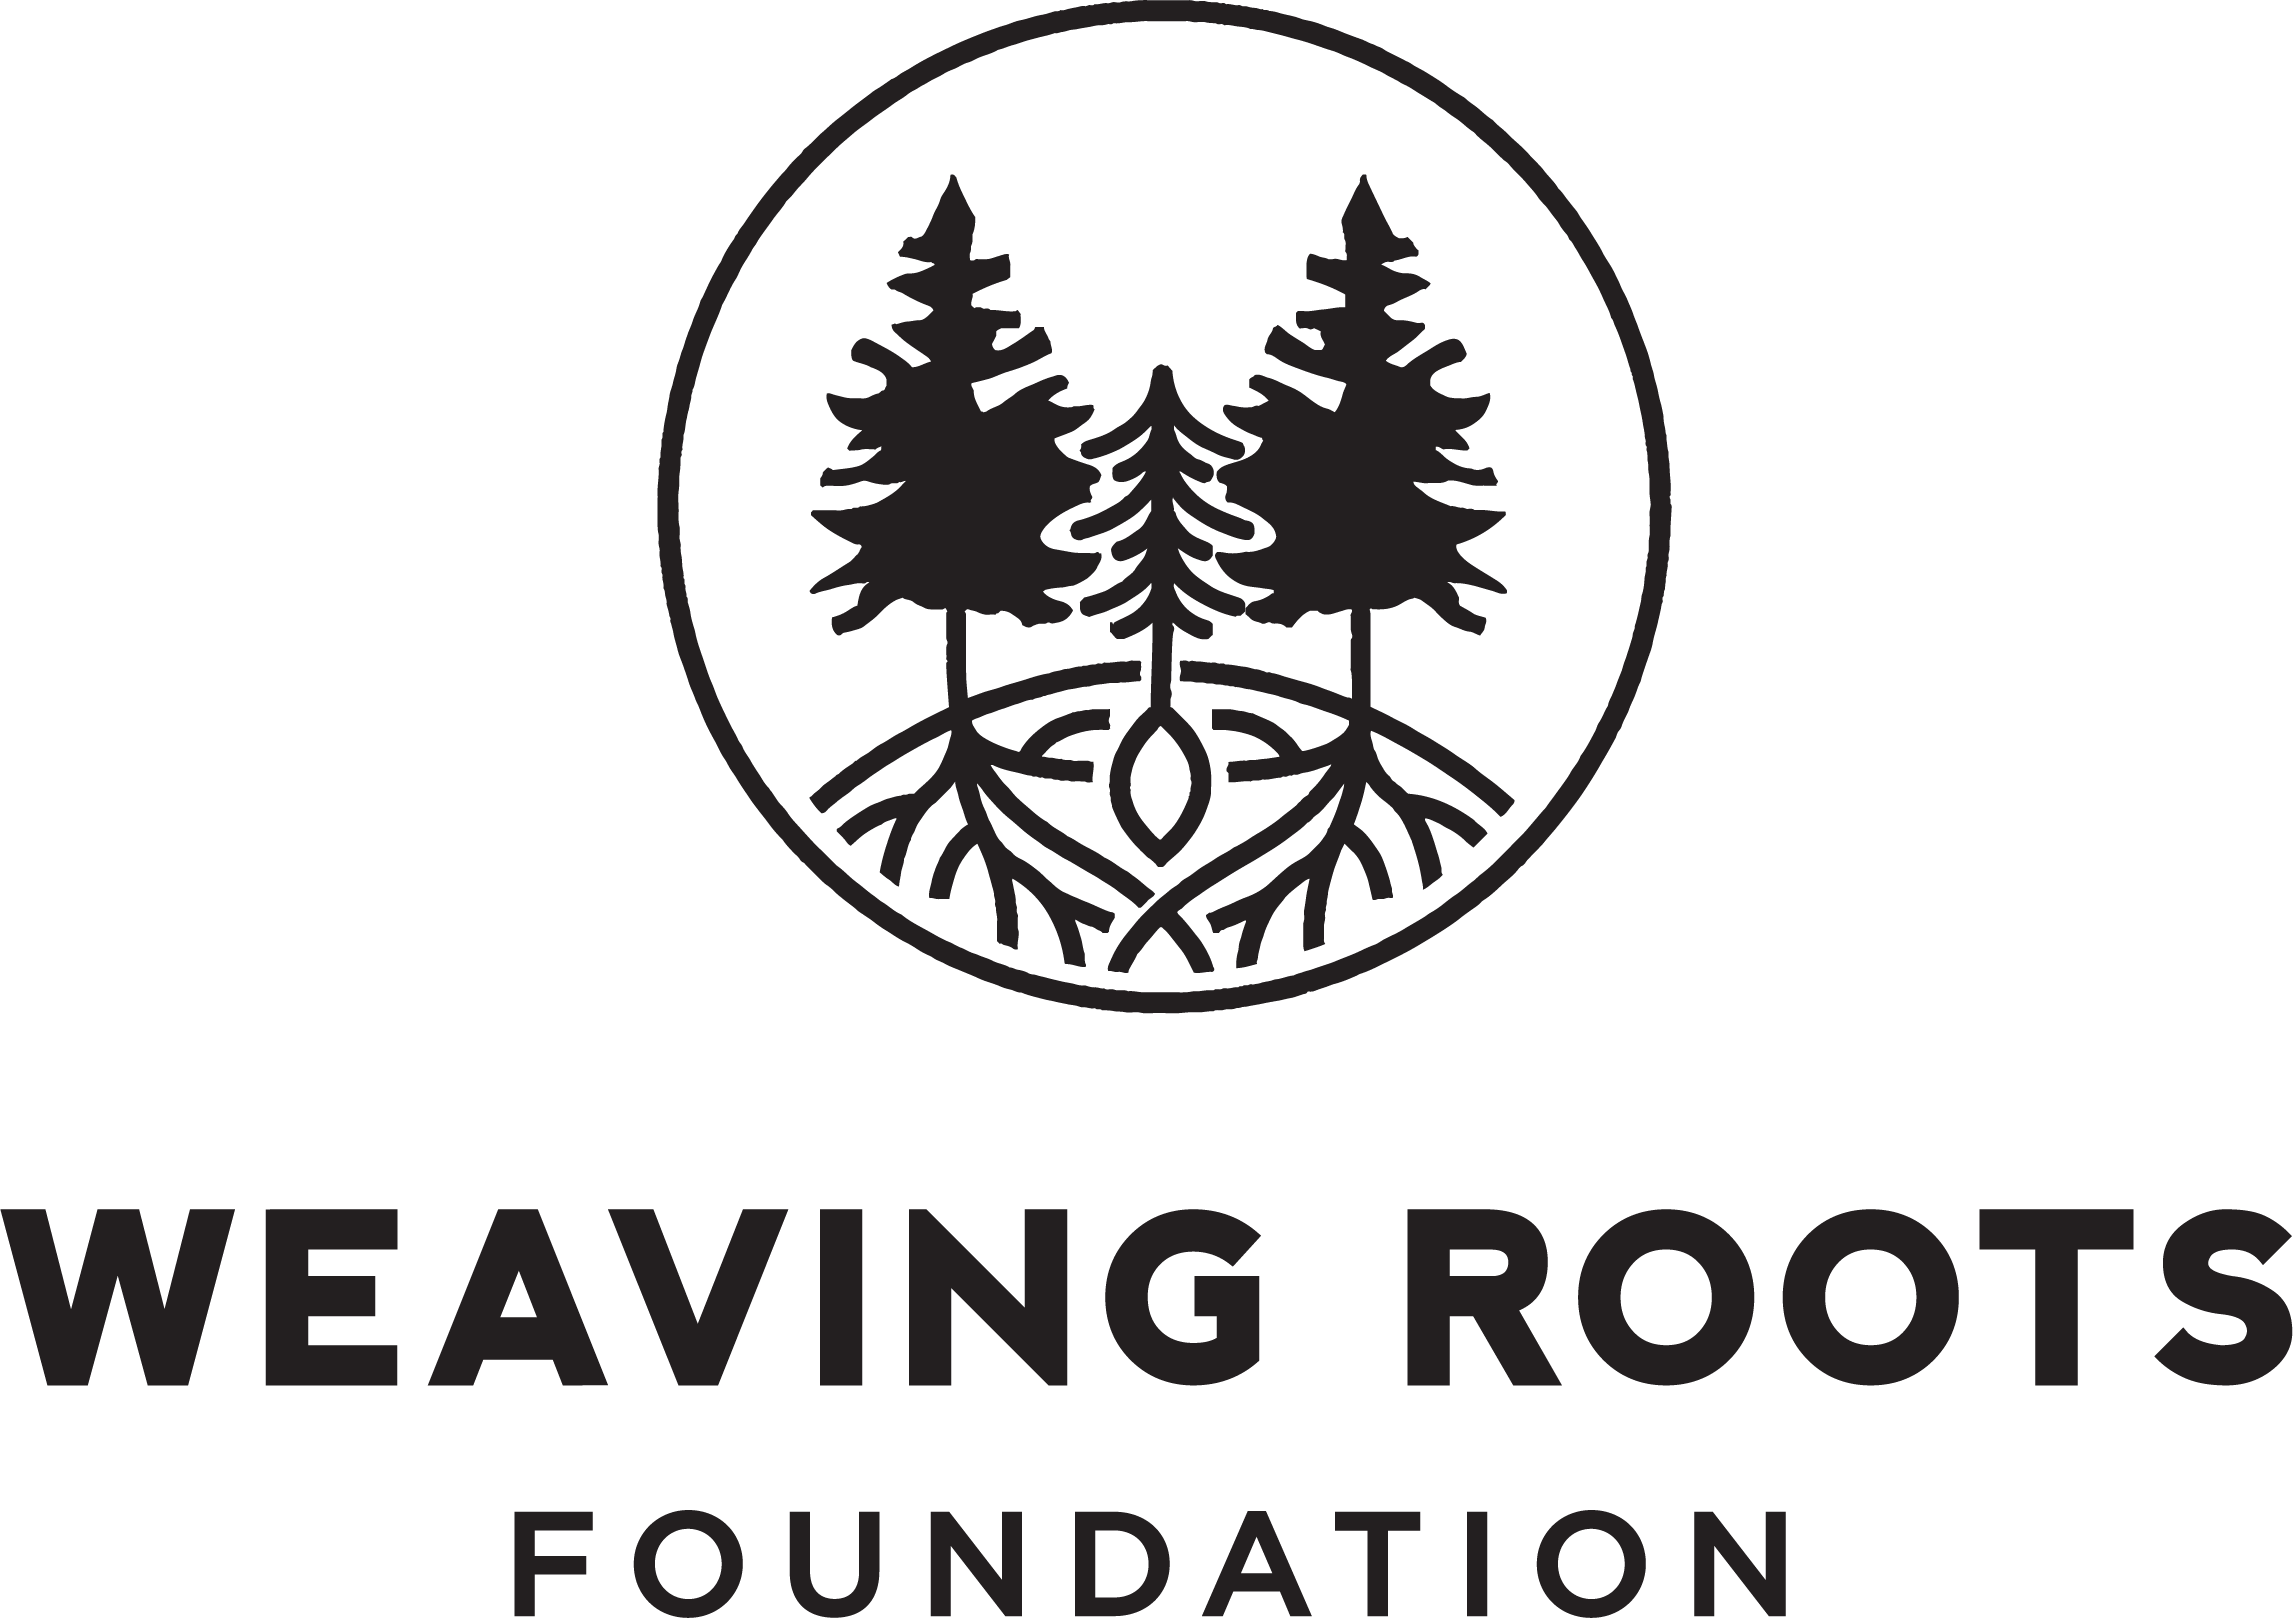 Weaving Roots Foundation